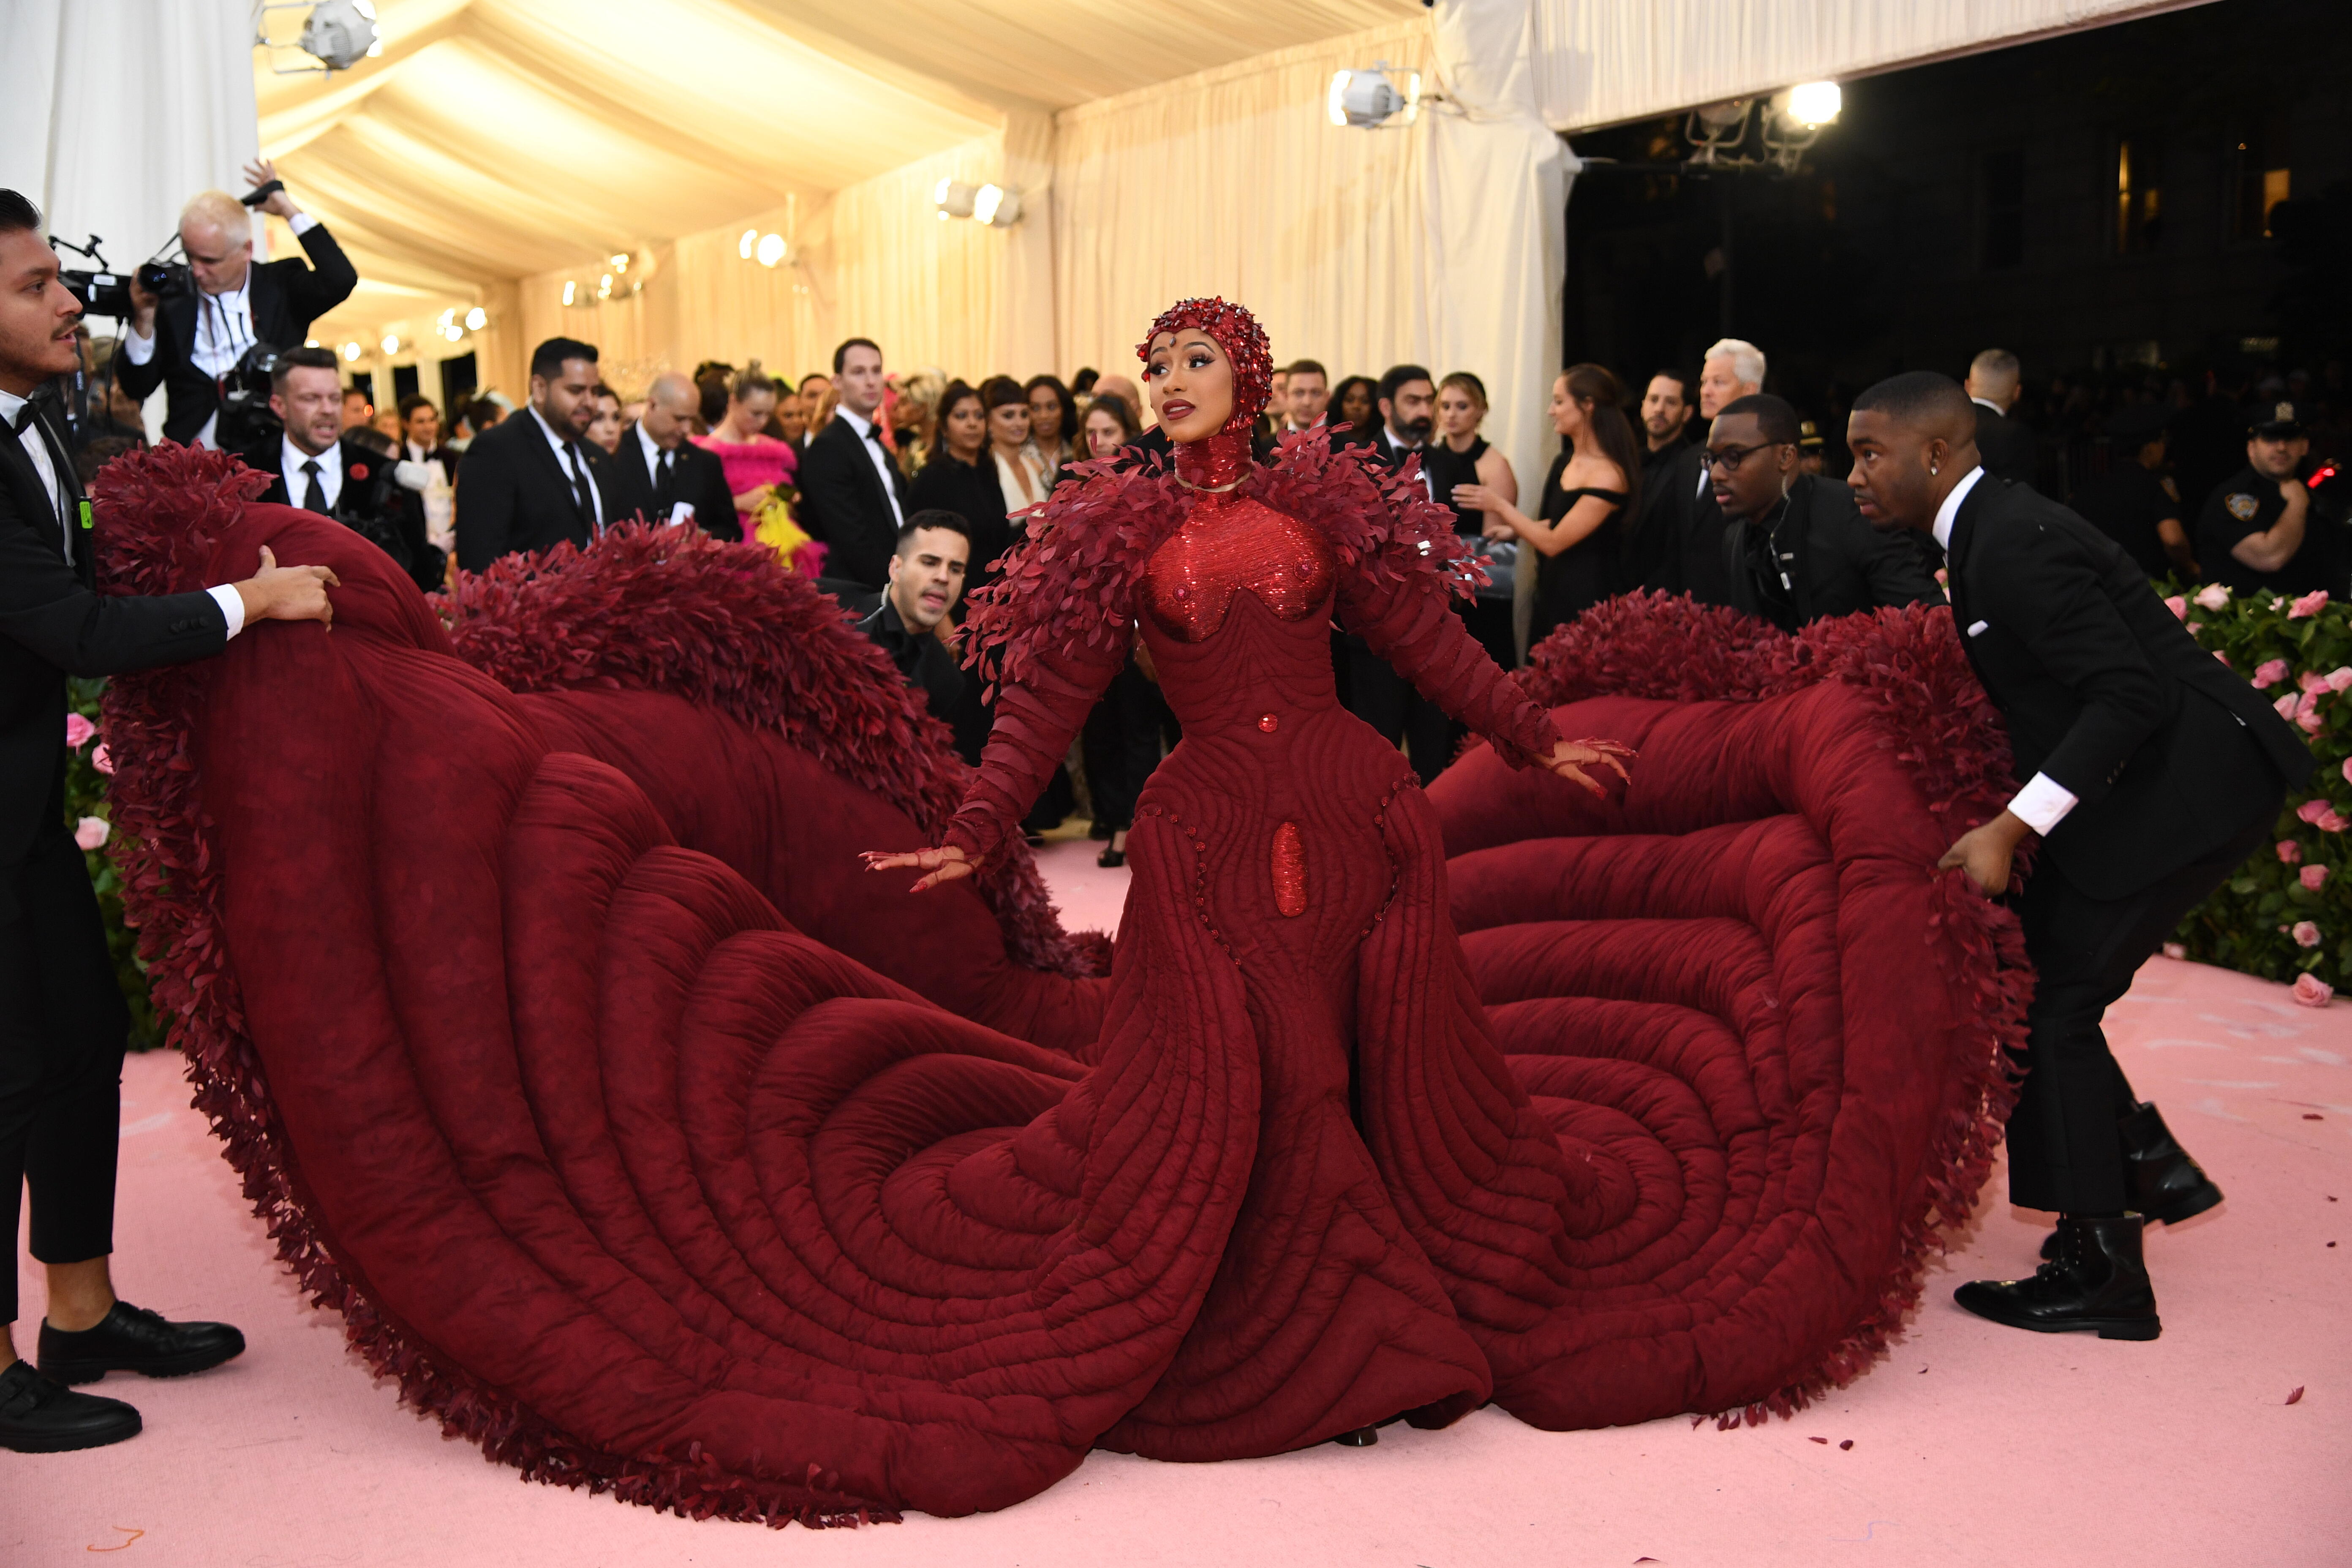 Cardi B’s 2019 Met Gala Gown Required 5 Handlers: See the Epic Photos